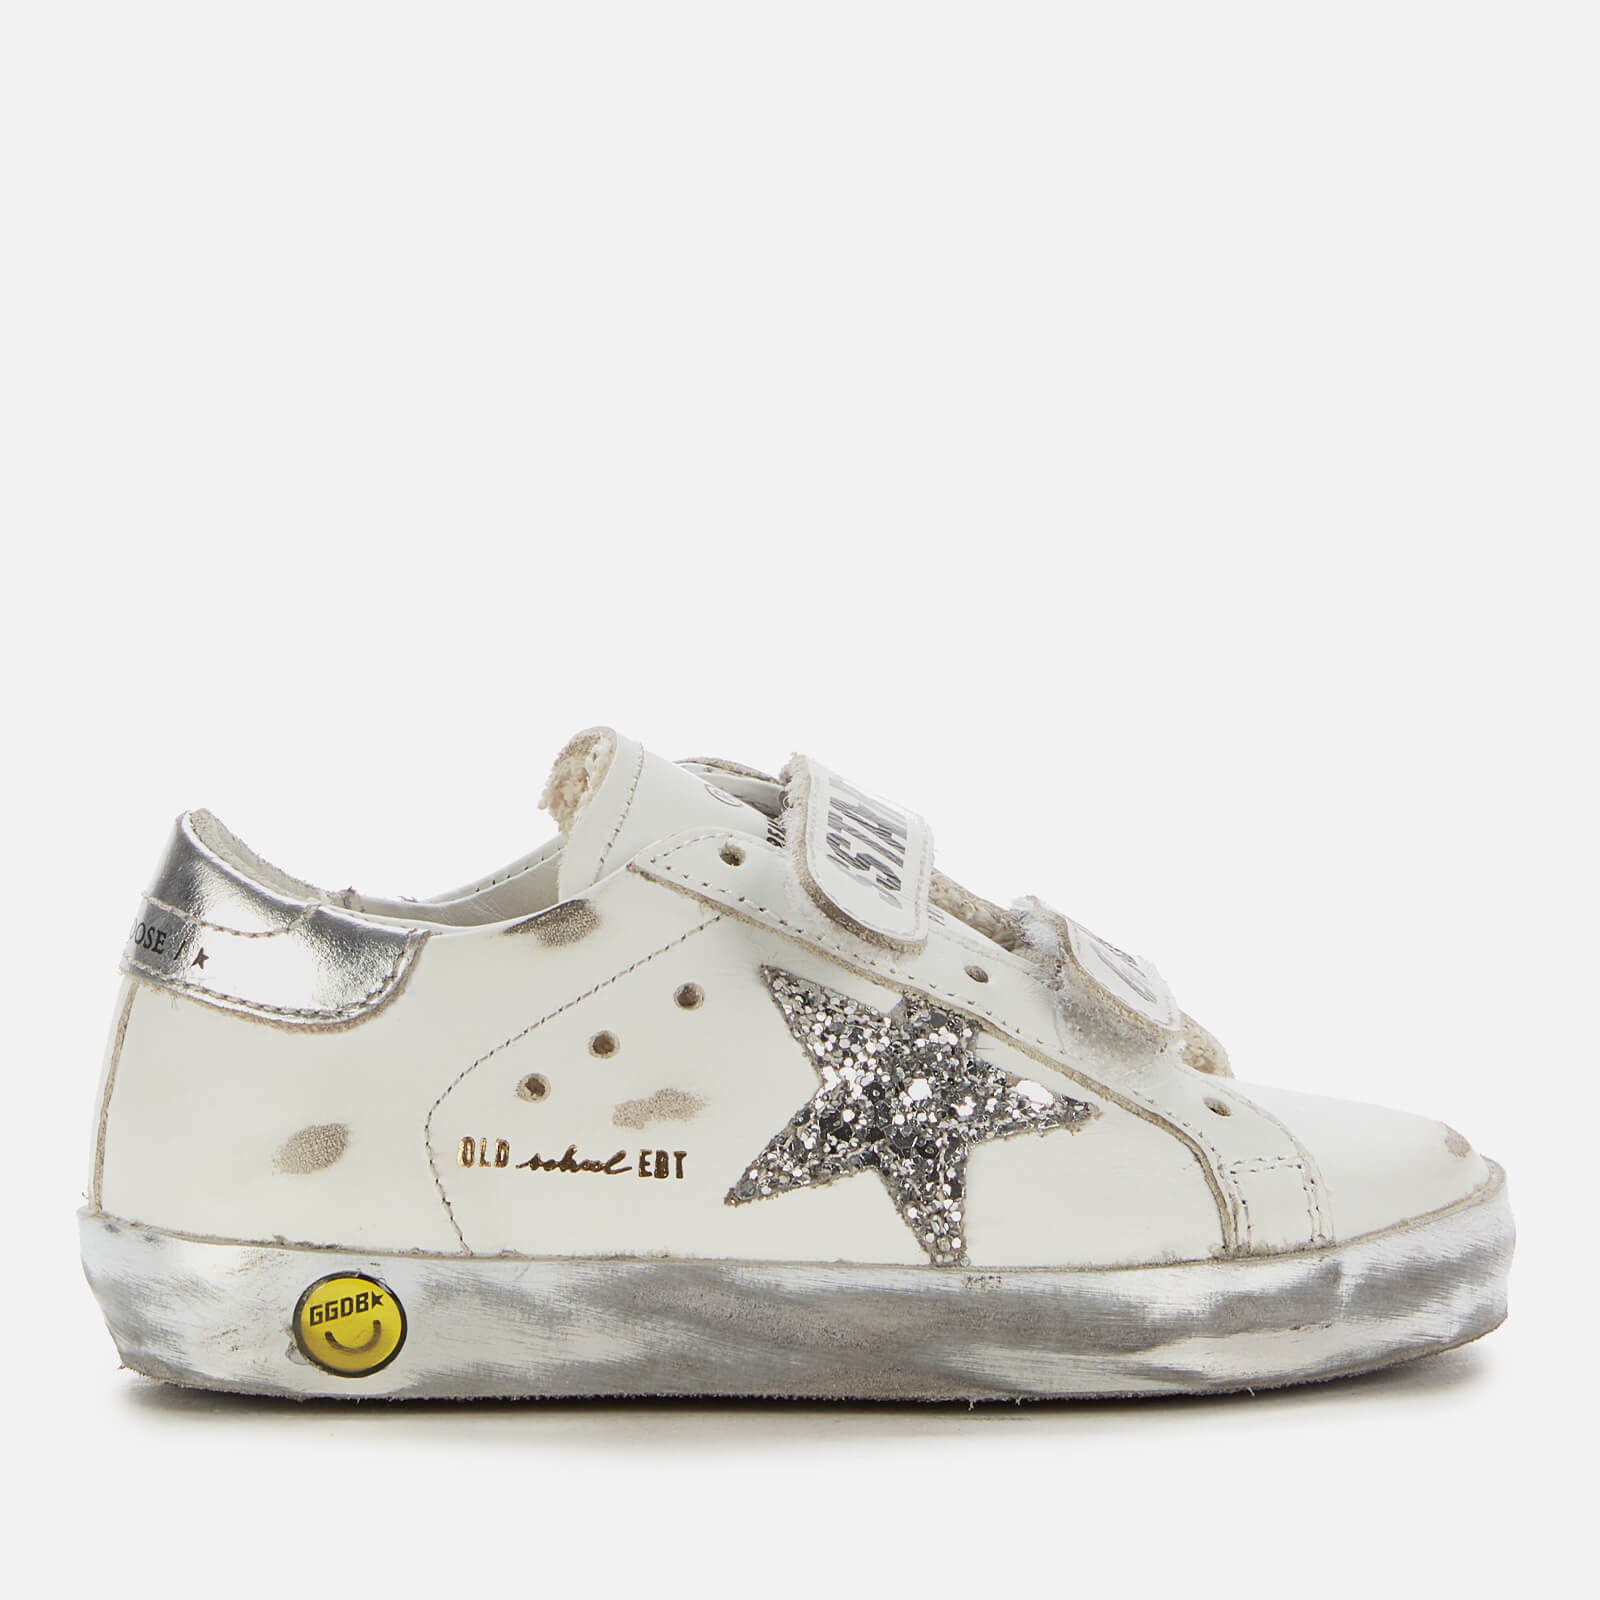 Golden Goose Toddlers' Leather Upper and Stripes Glitter Star Laminated Heel Sparkle Foxing Trainers - White/Silver - UK 4 Infant